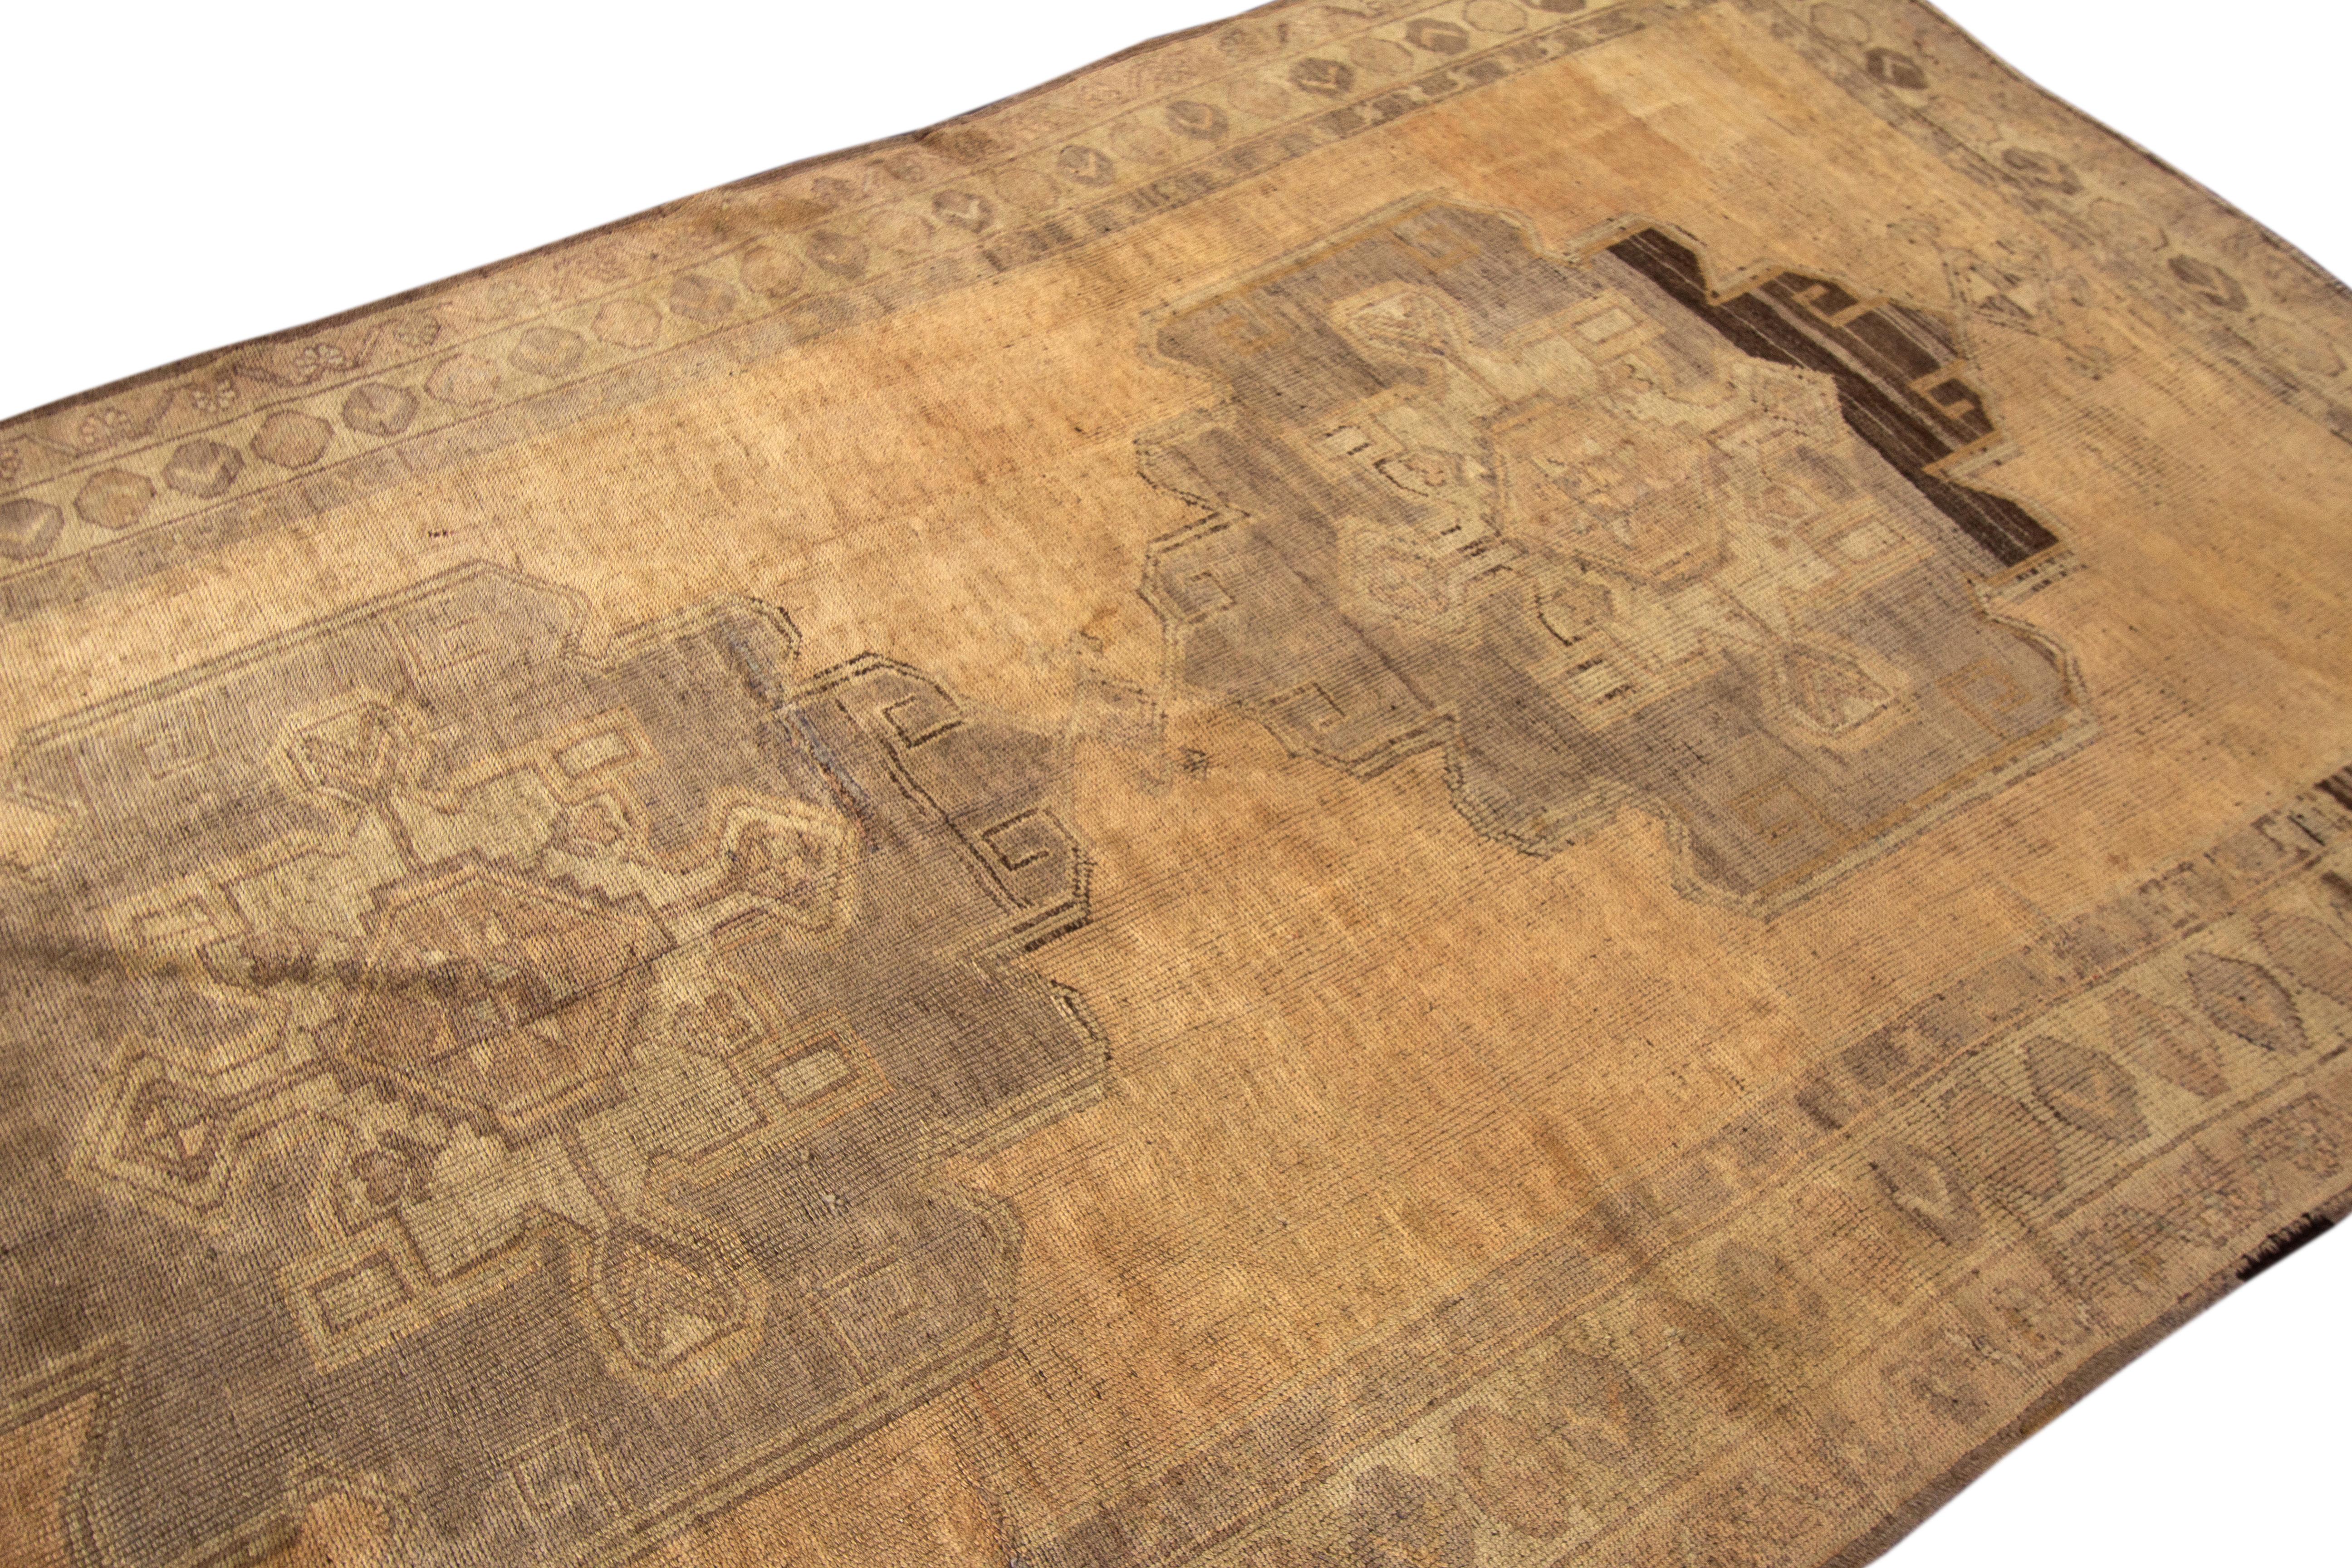 Beautiful Antique Turkish Khotan hand-knotted wool rug with a tan field. This Khotan has gray, brown, and blue accents in a gorgeous all-over medallion floral motif design.

This runner measures 5'2